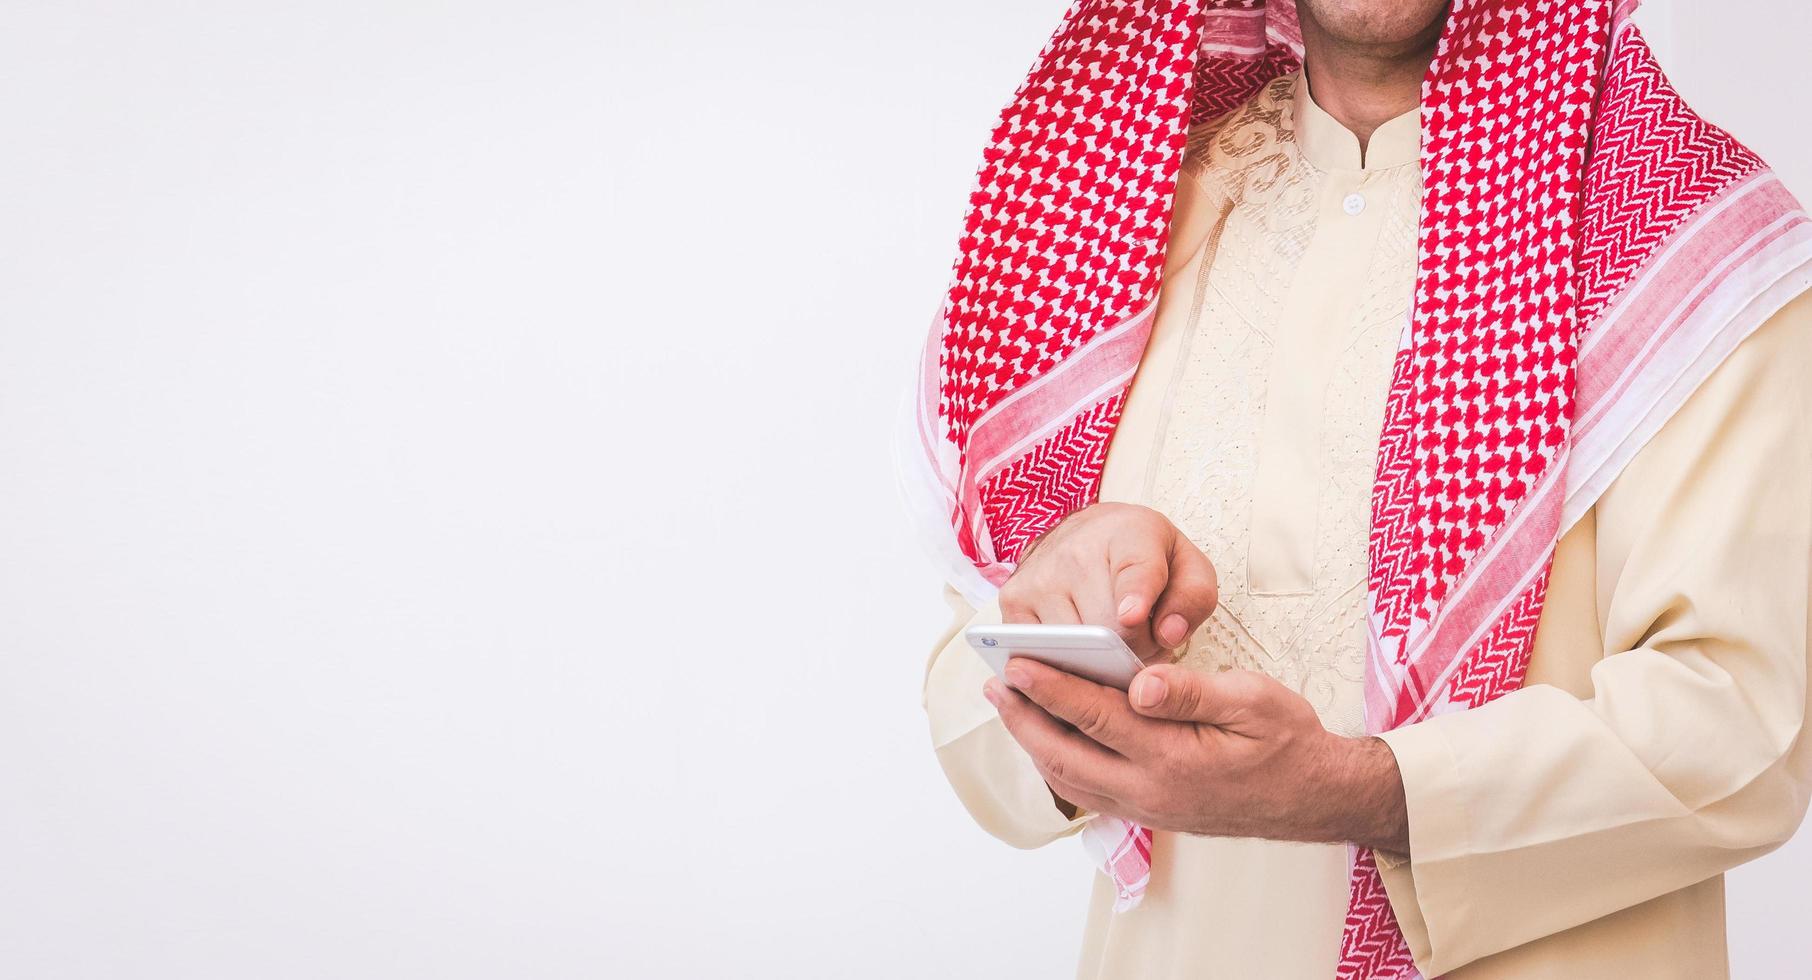 Arab businessman useing on a mobile phone photo